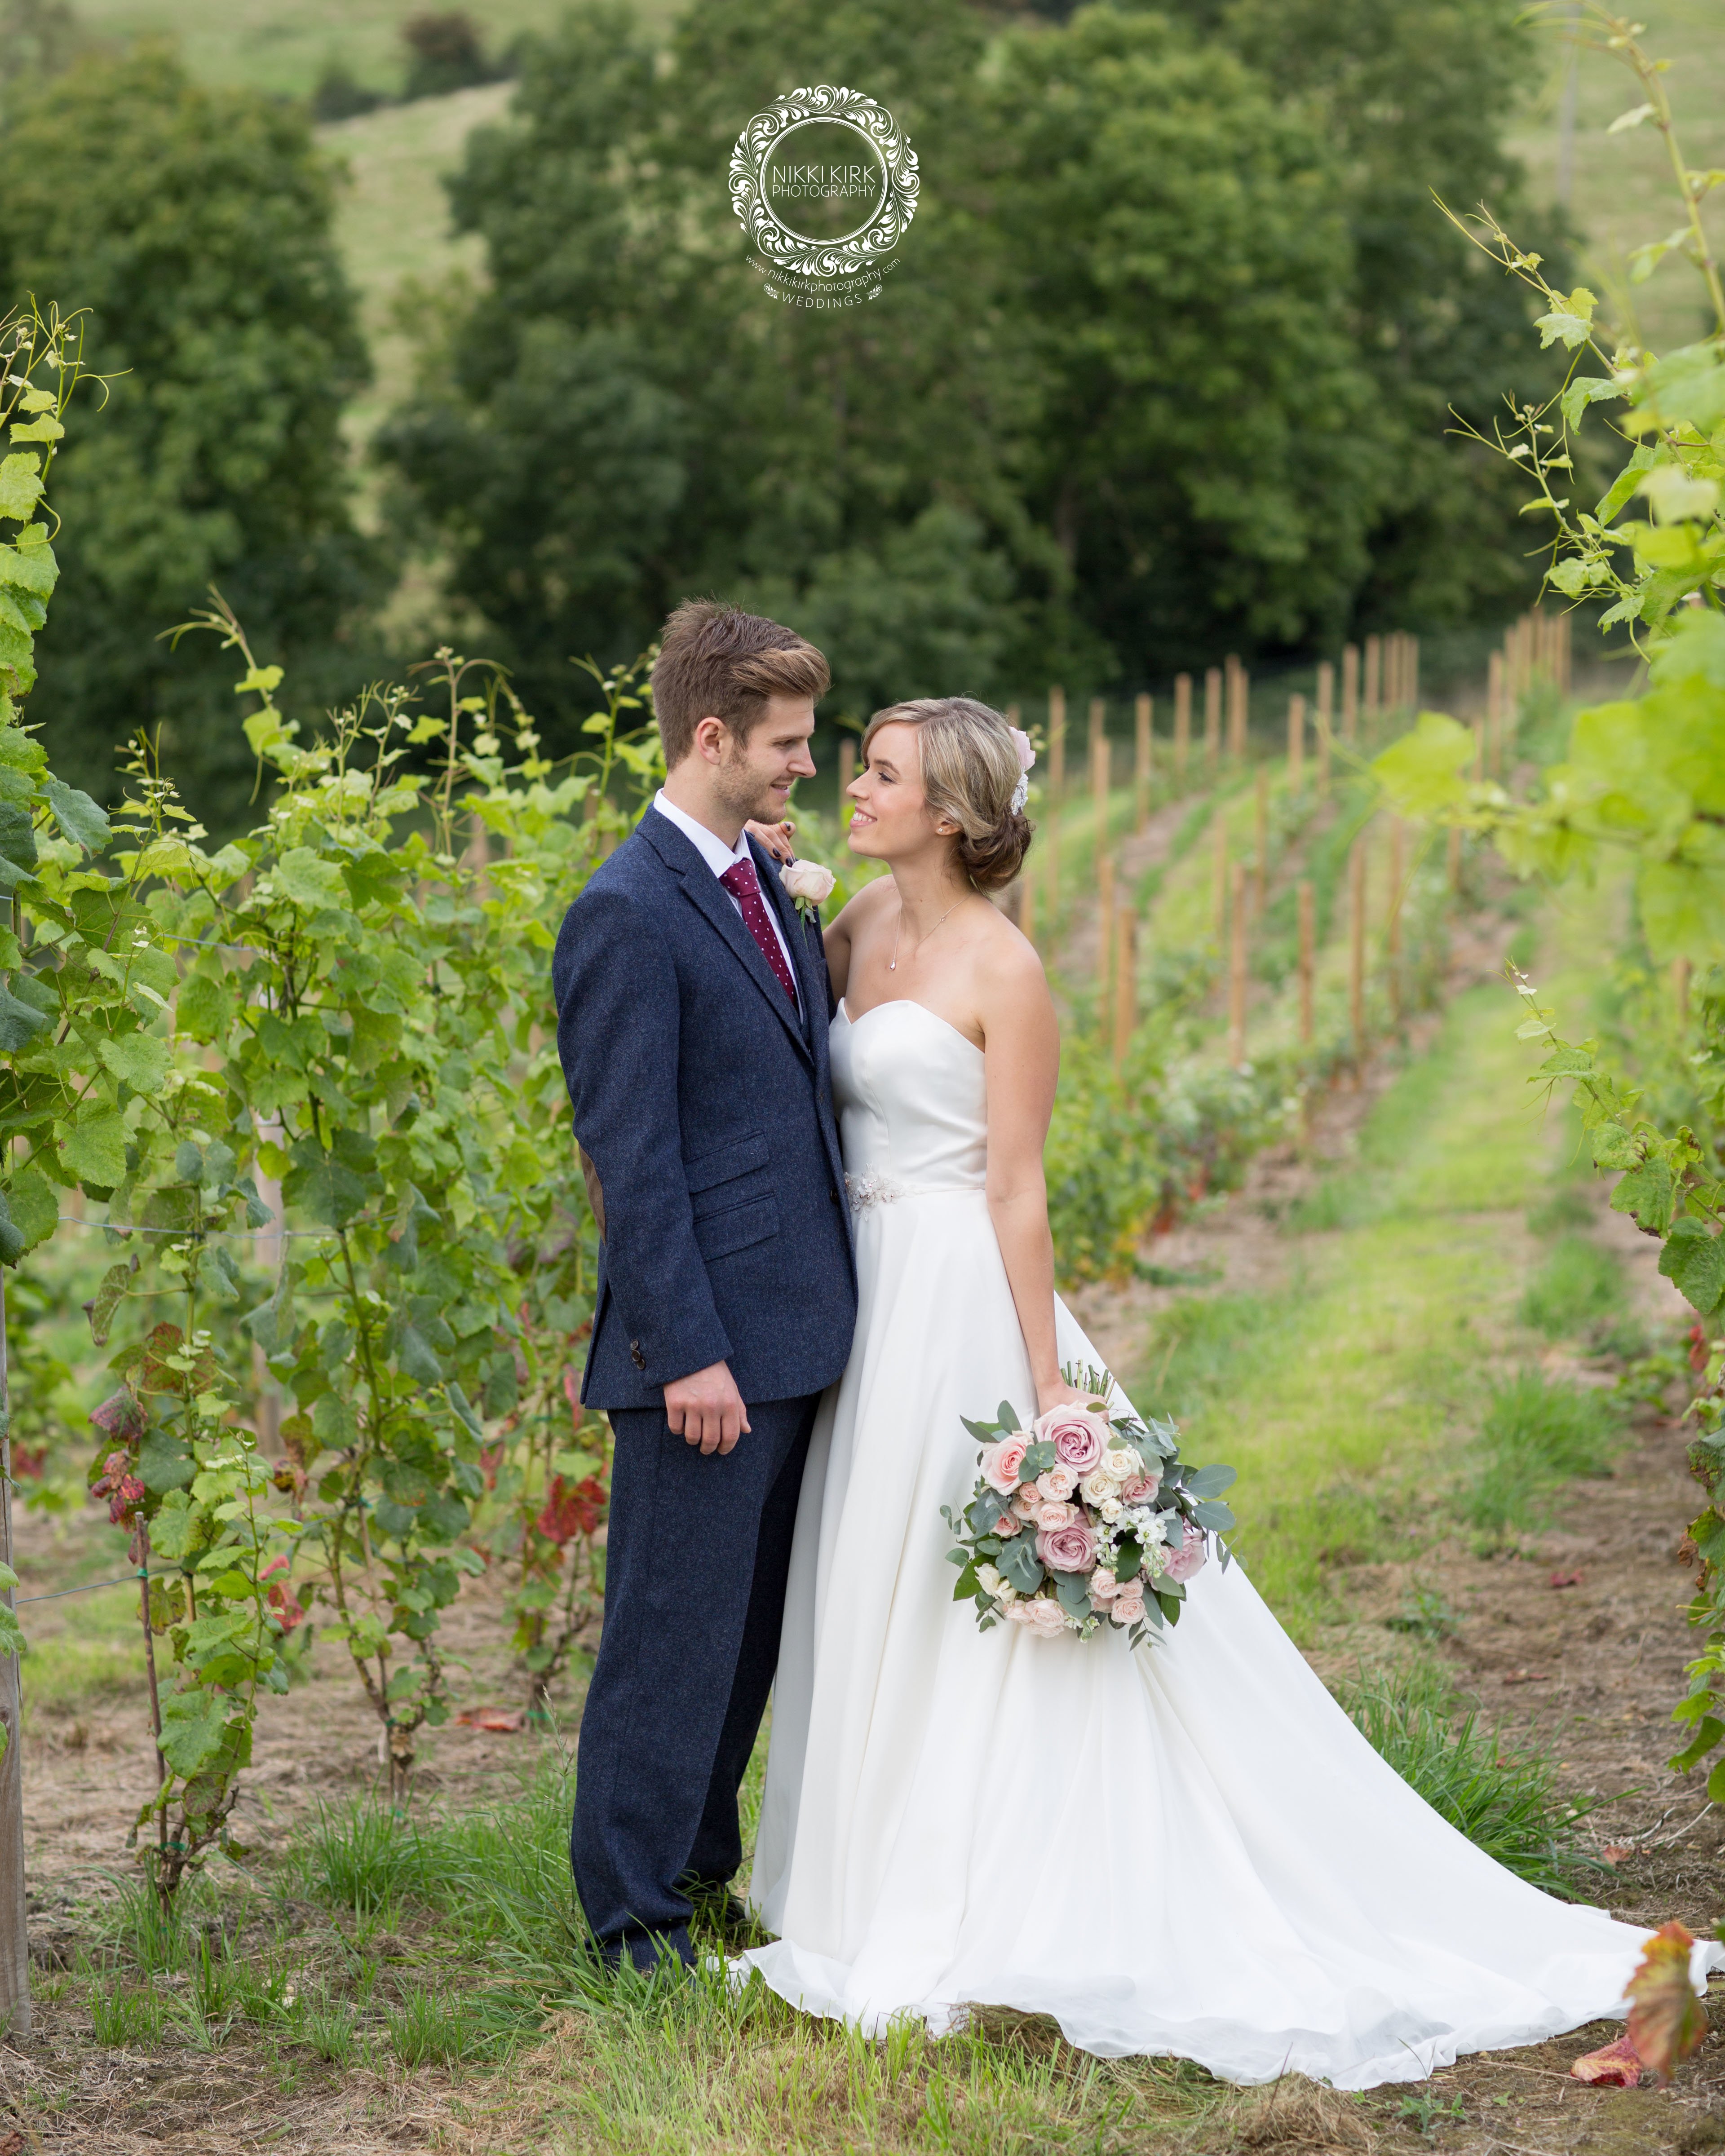 Nikki-Kirk-Photography-wedding-photographer-Gloucestershire-Heart-of-The-Cotswolds-Dryhill